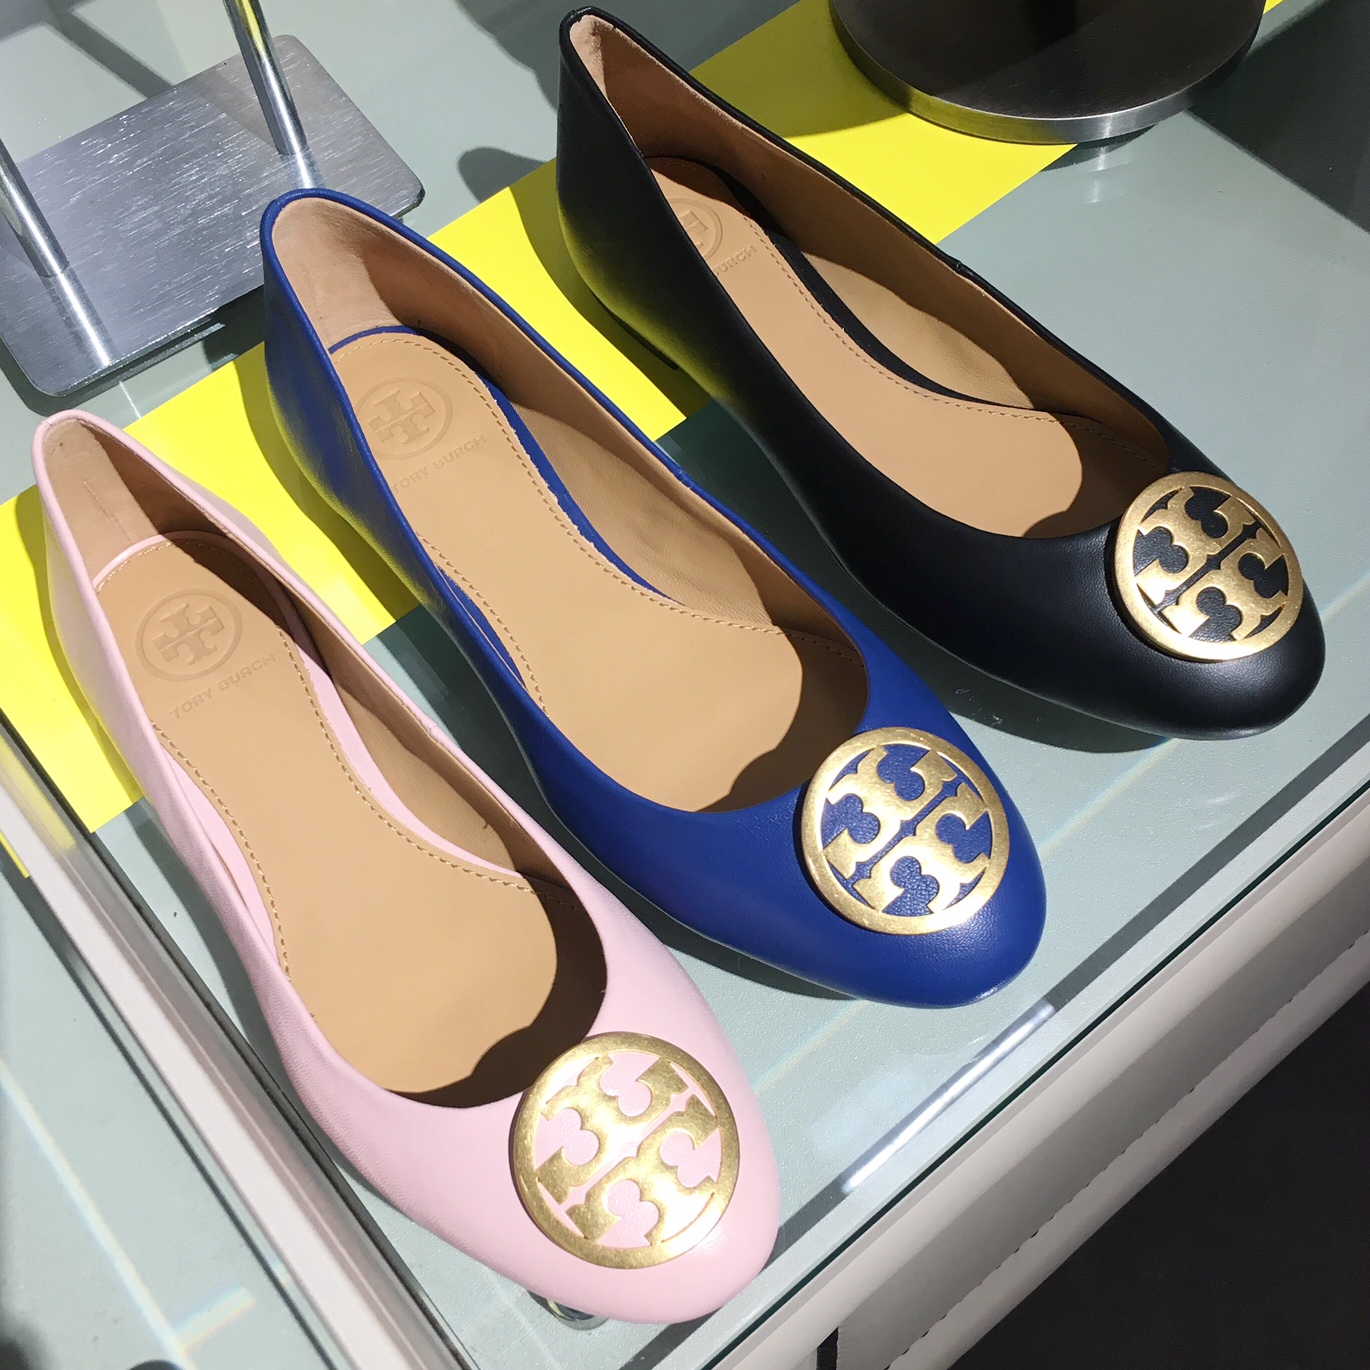 nordstrom tory burch shoes